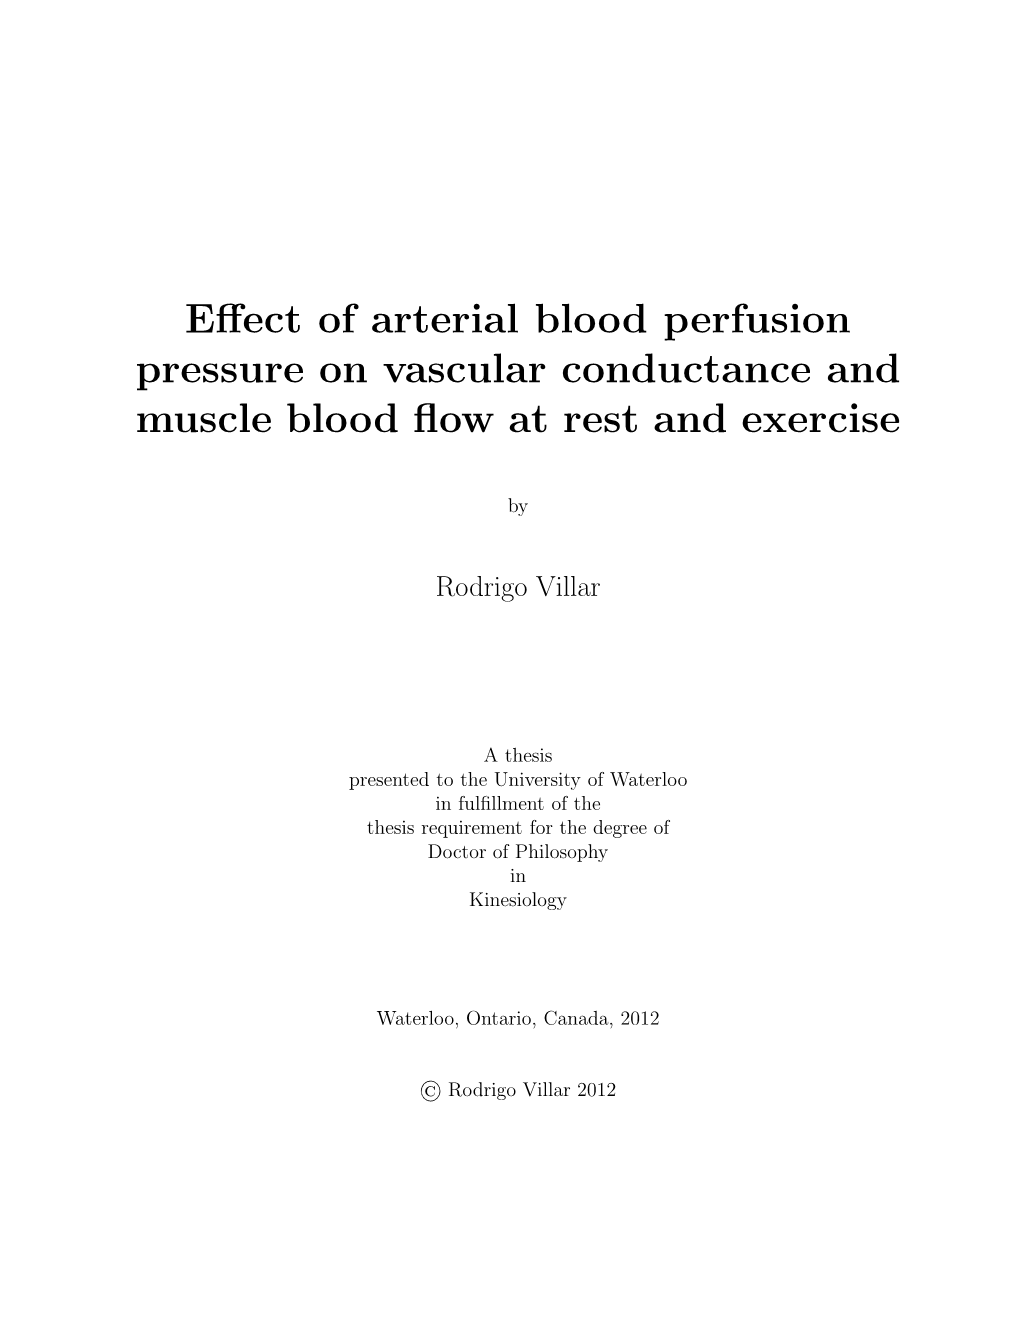 Effect of Arterial Blood Perfusion Pressure on Vascular Conductance